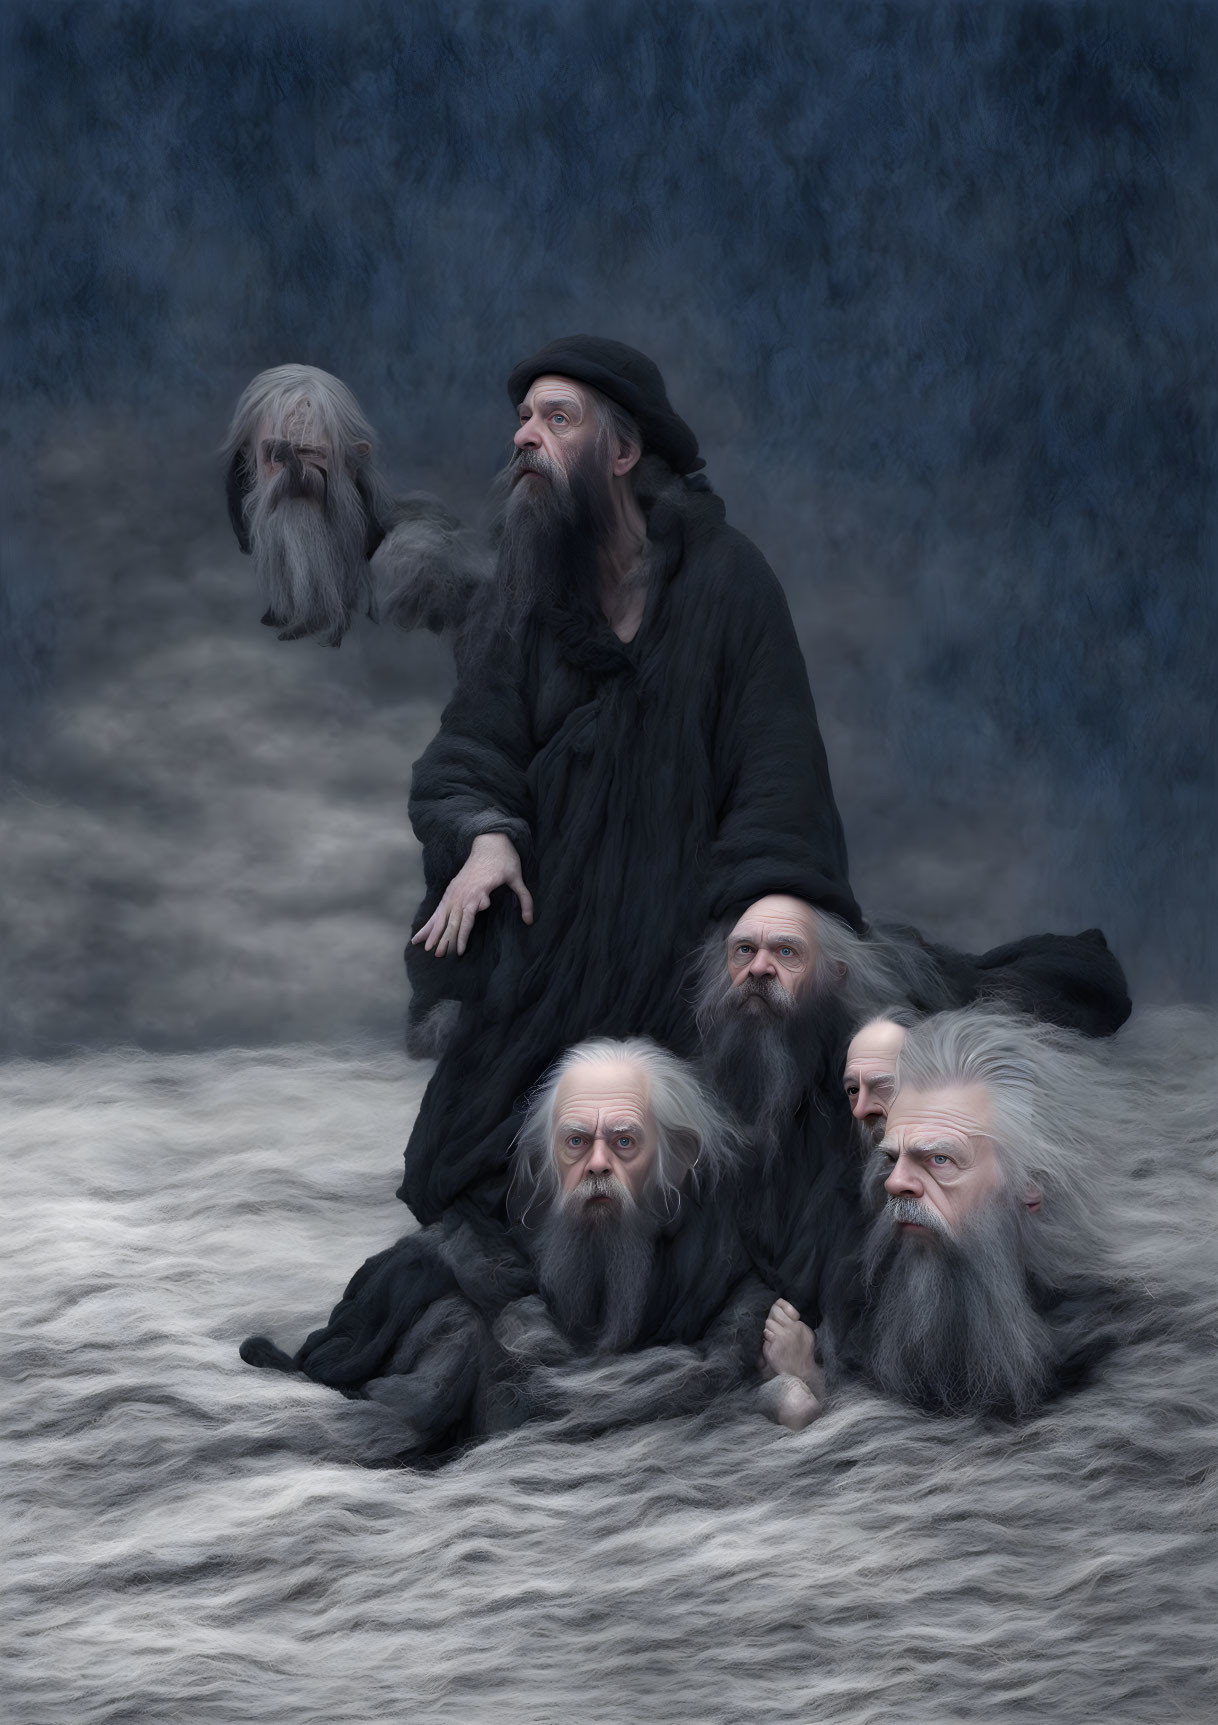 Composite Image: Bearded Man in Dark Robes with Multiple Expressions